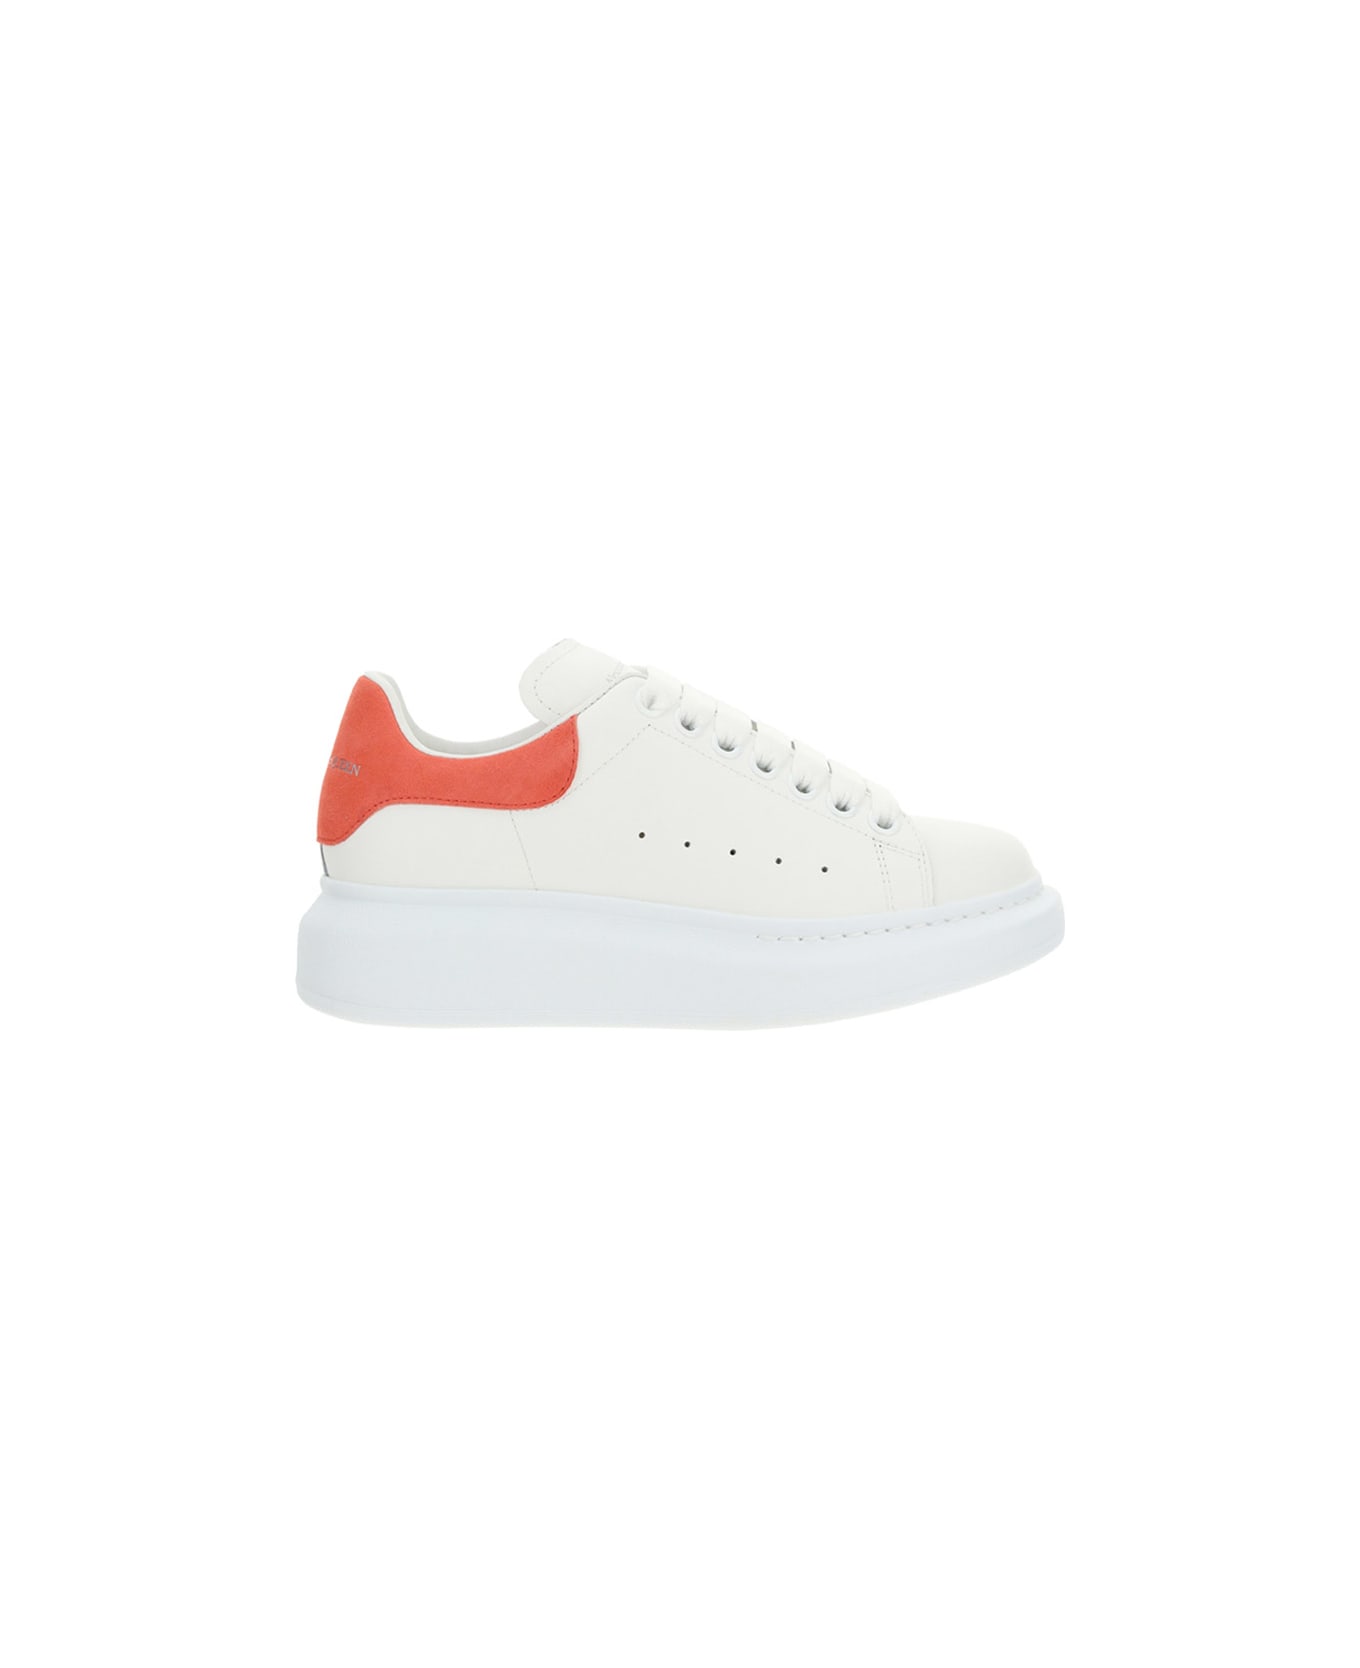 Alexander McQueen Sneakers - White/coral